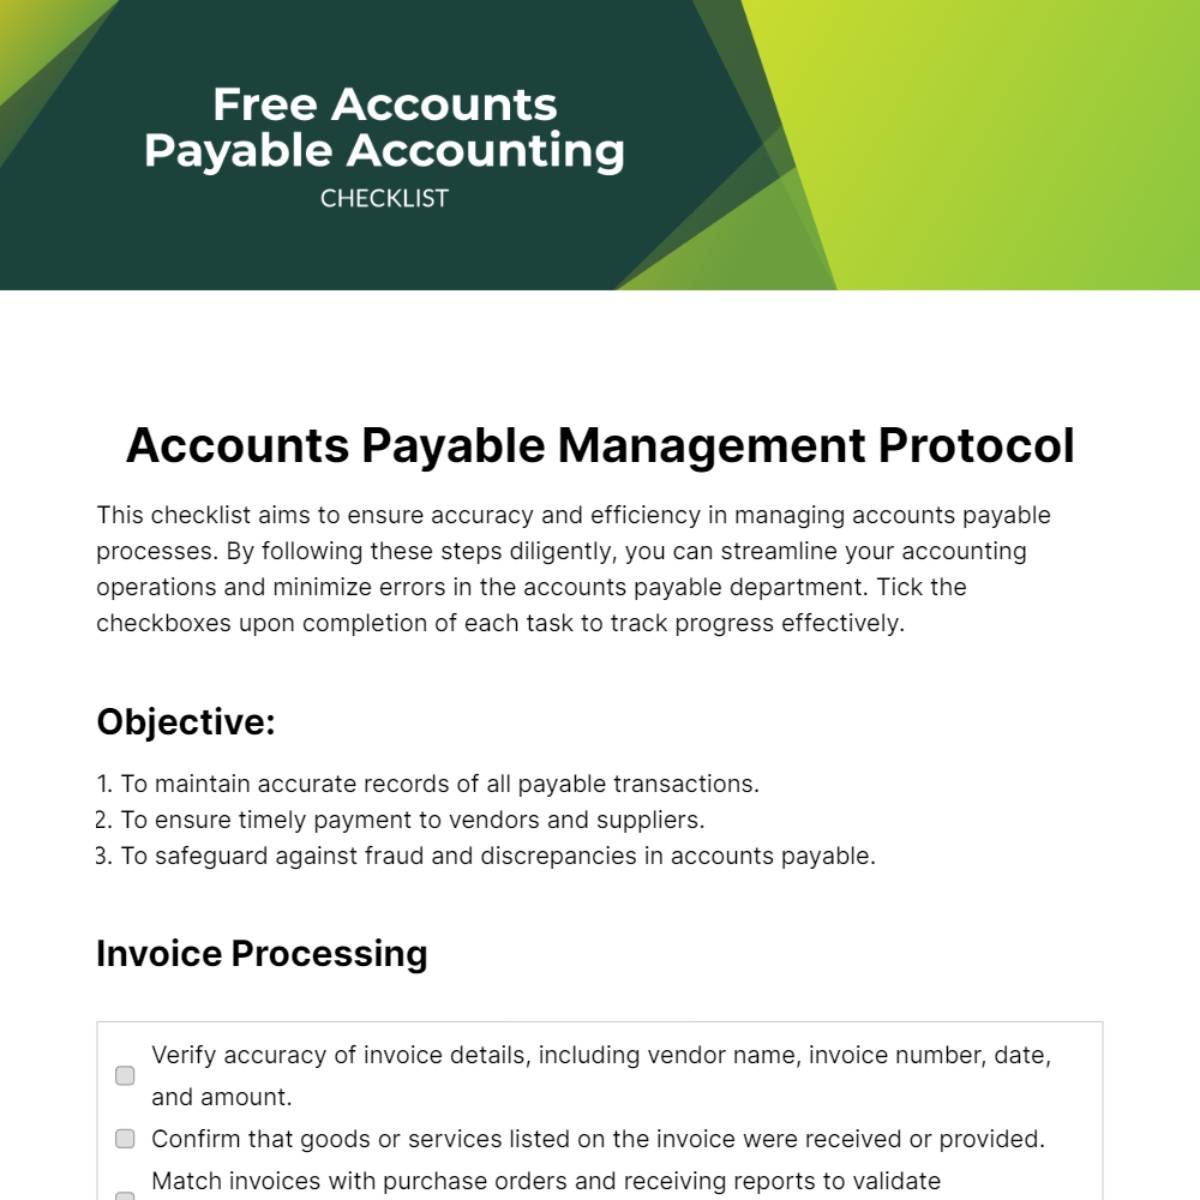 Free Accounts Payable Accounting Checklist Template